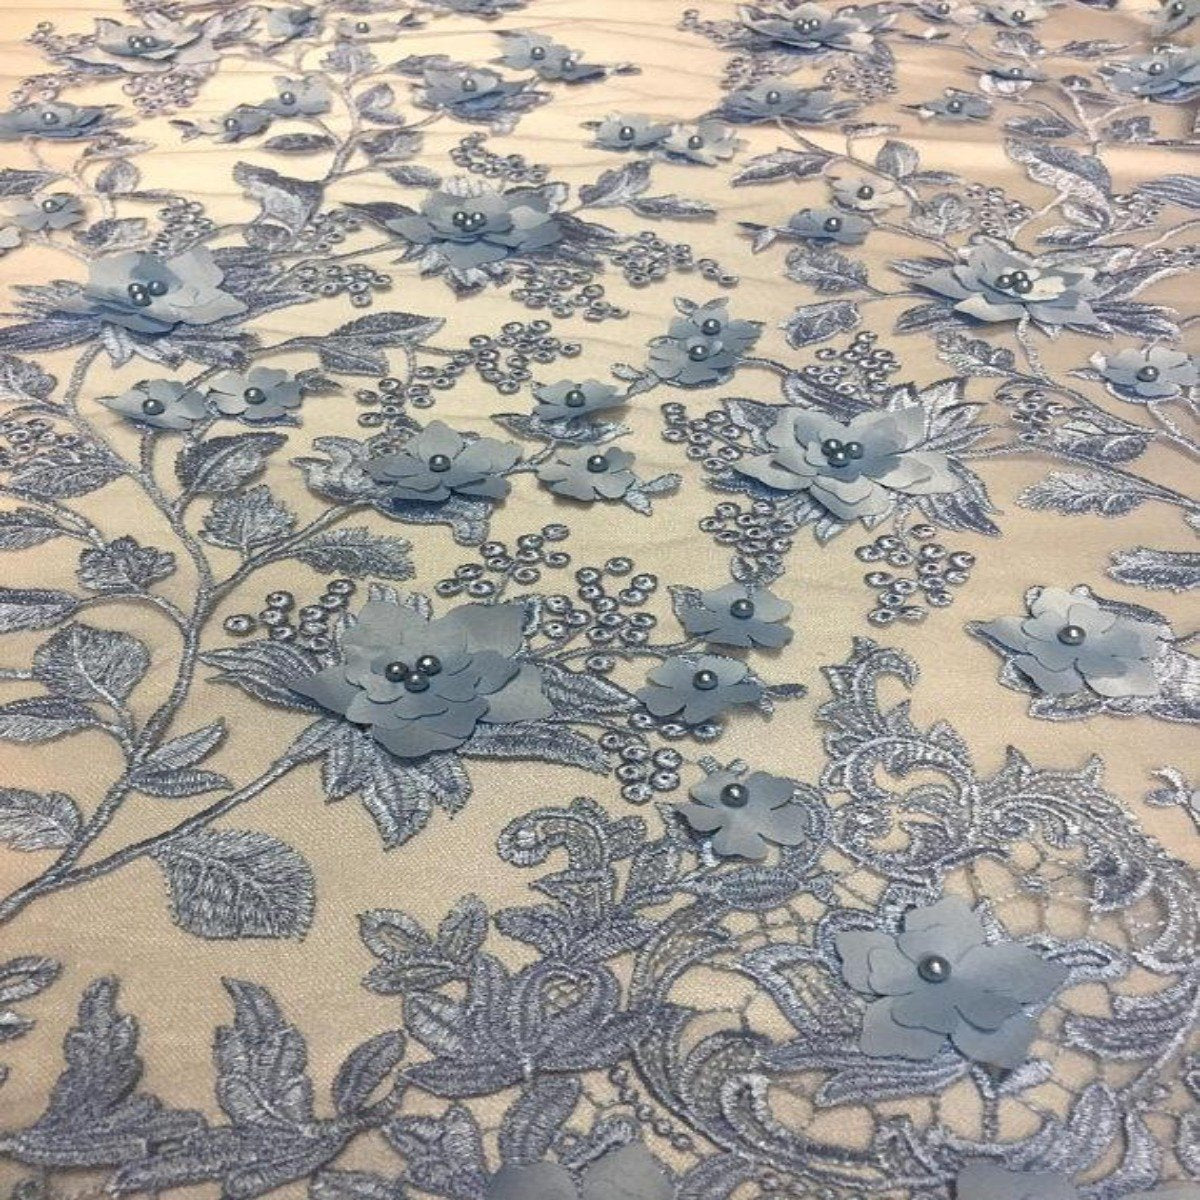 Baby Blue 3D Embroidered Satin Floral Pearl Lace Fabric - Fashion Fabrics LLC